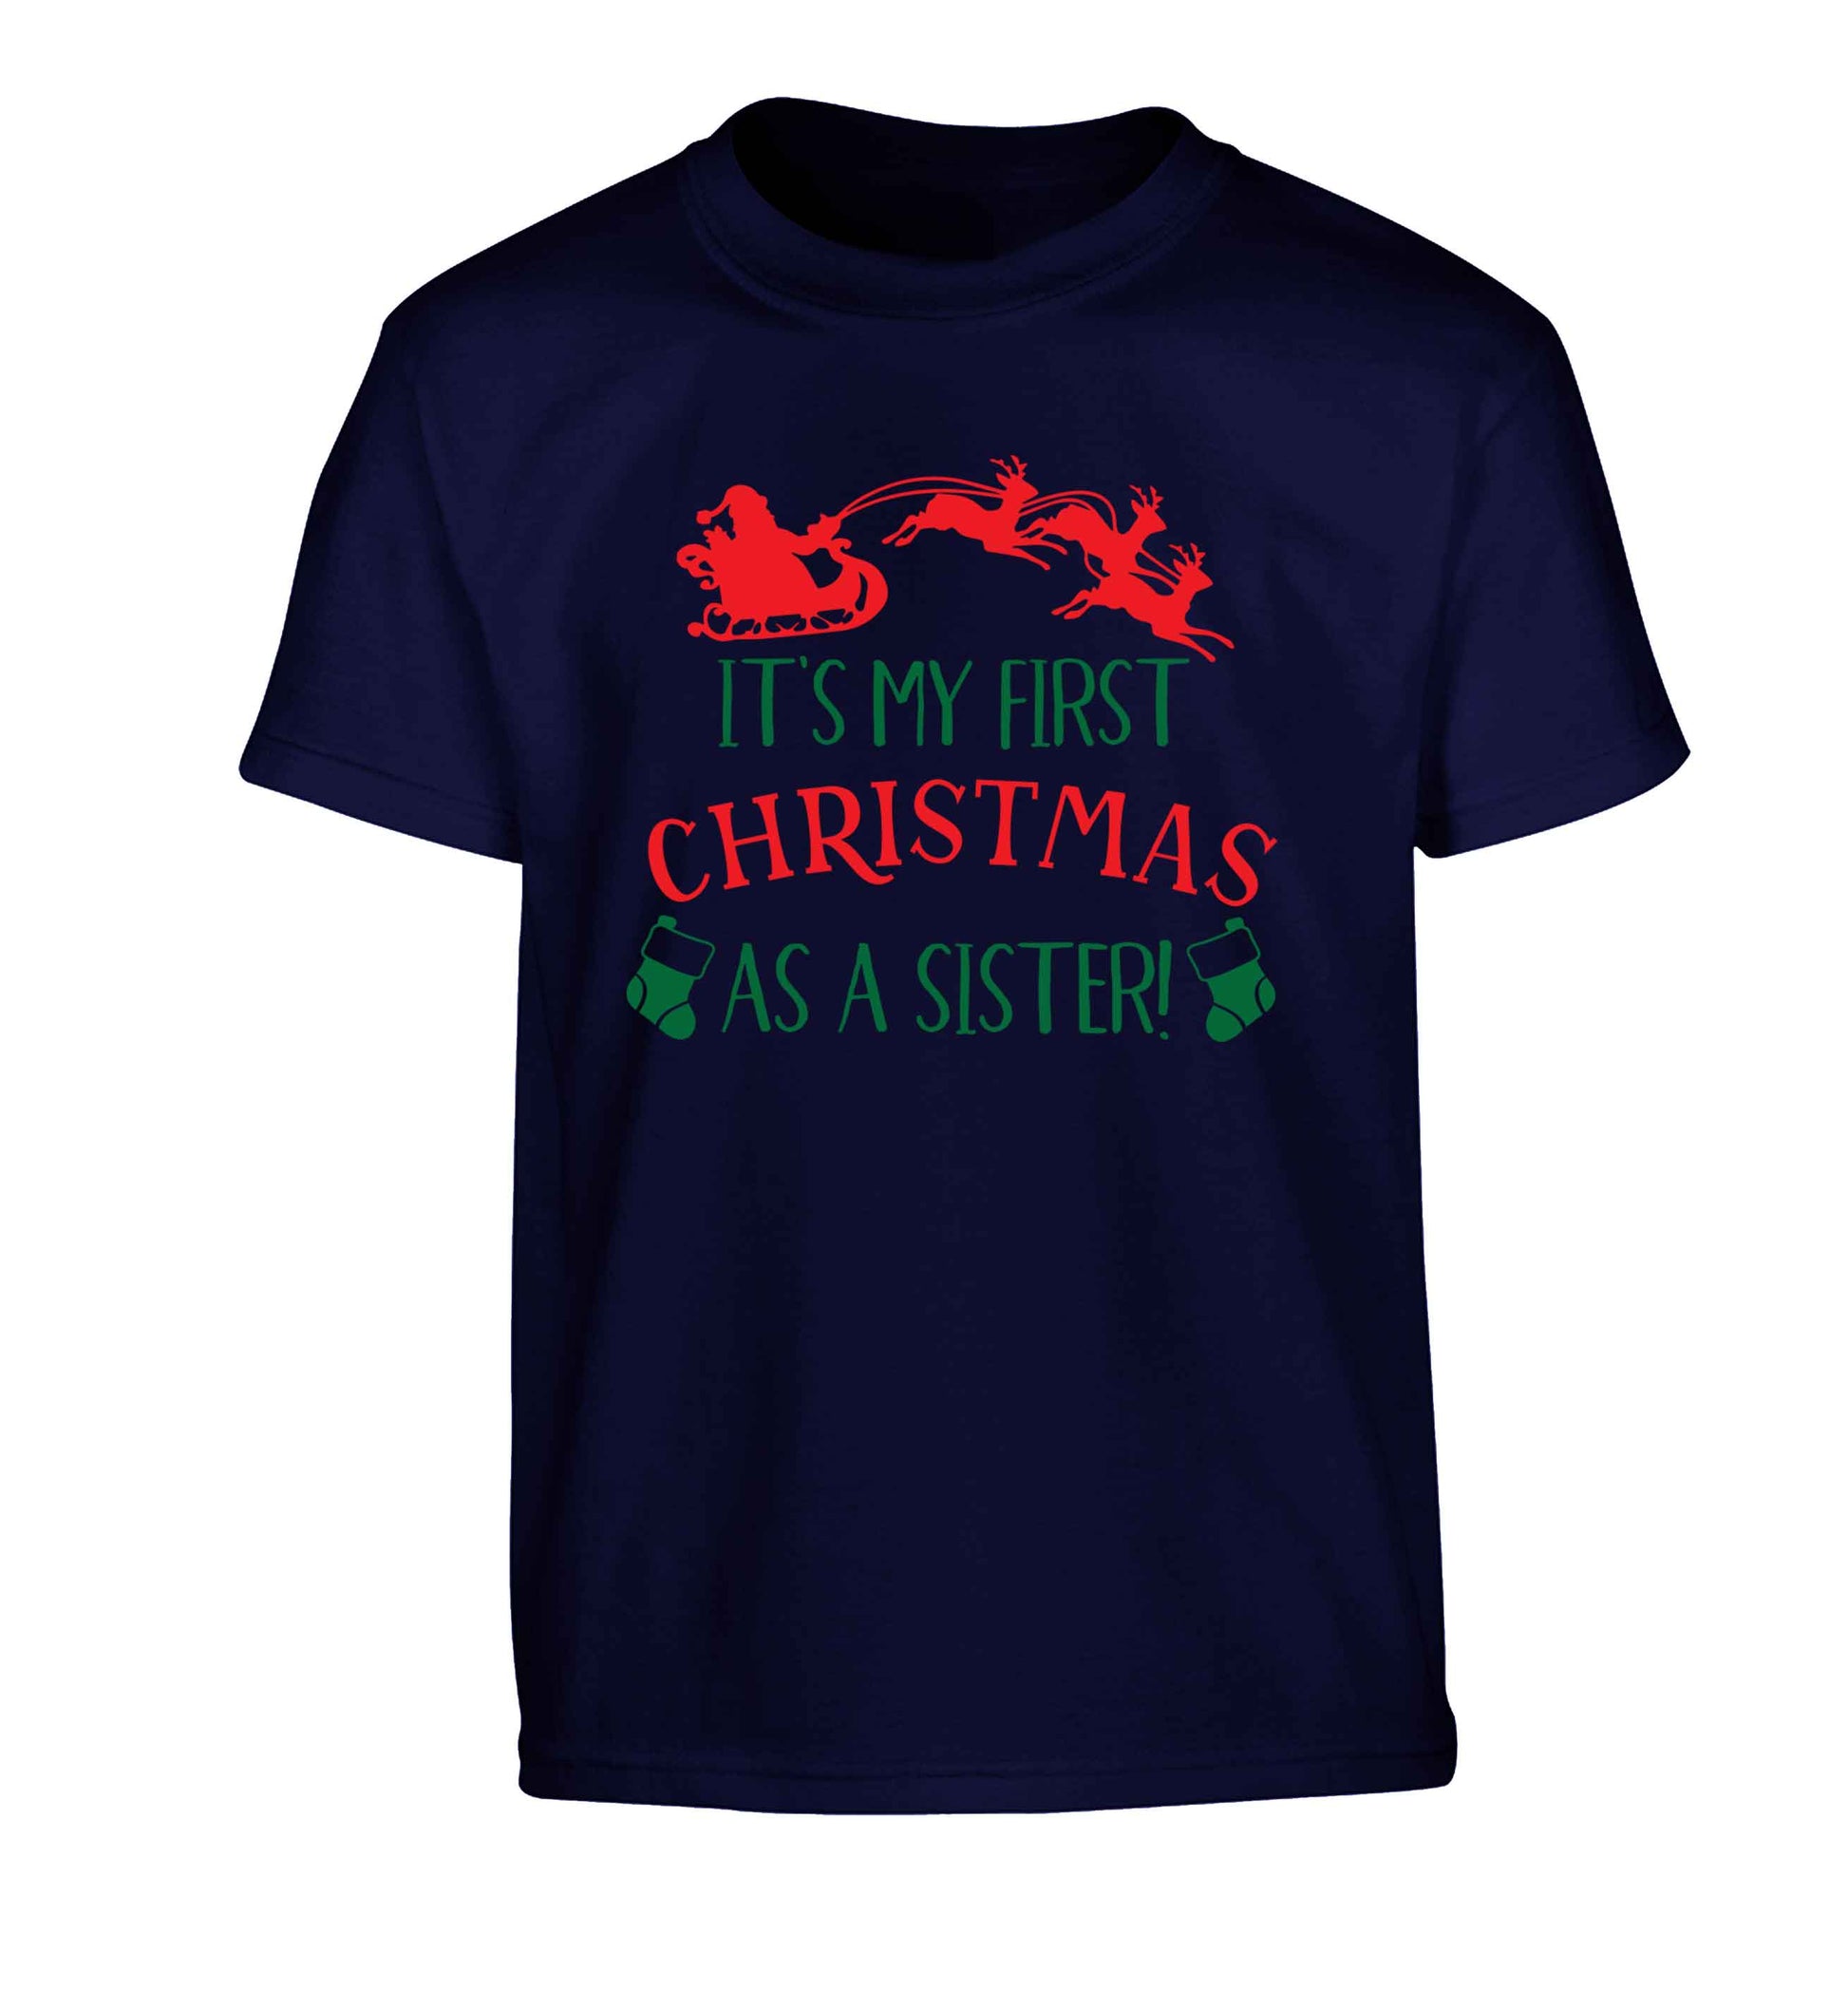 It's my first Christmas as a sister! Children's navy Tshirt 12-13 Years